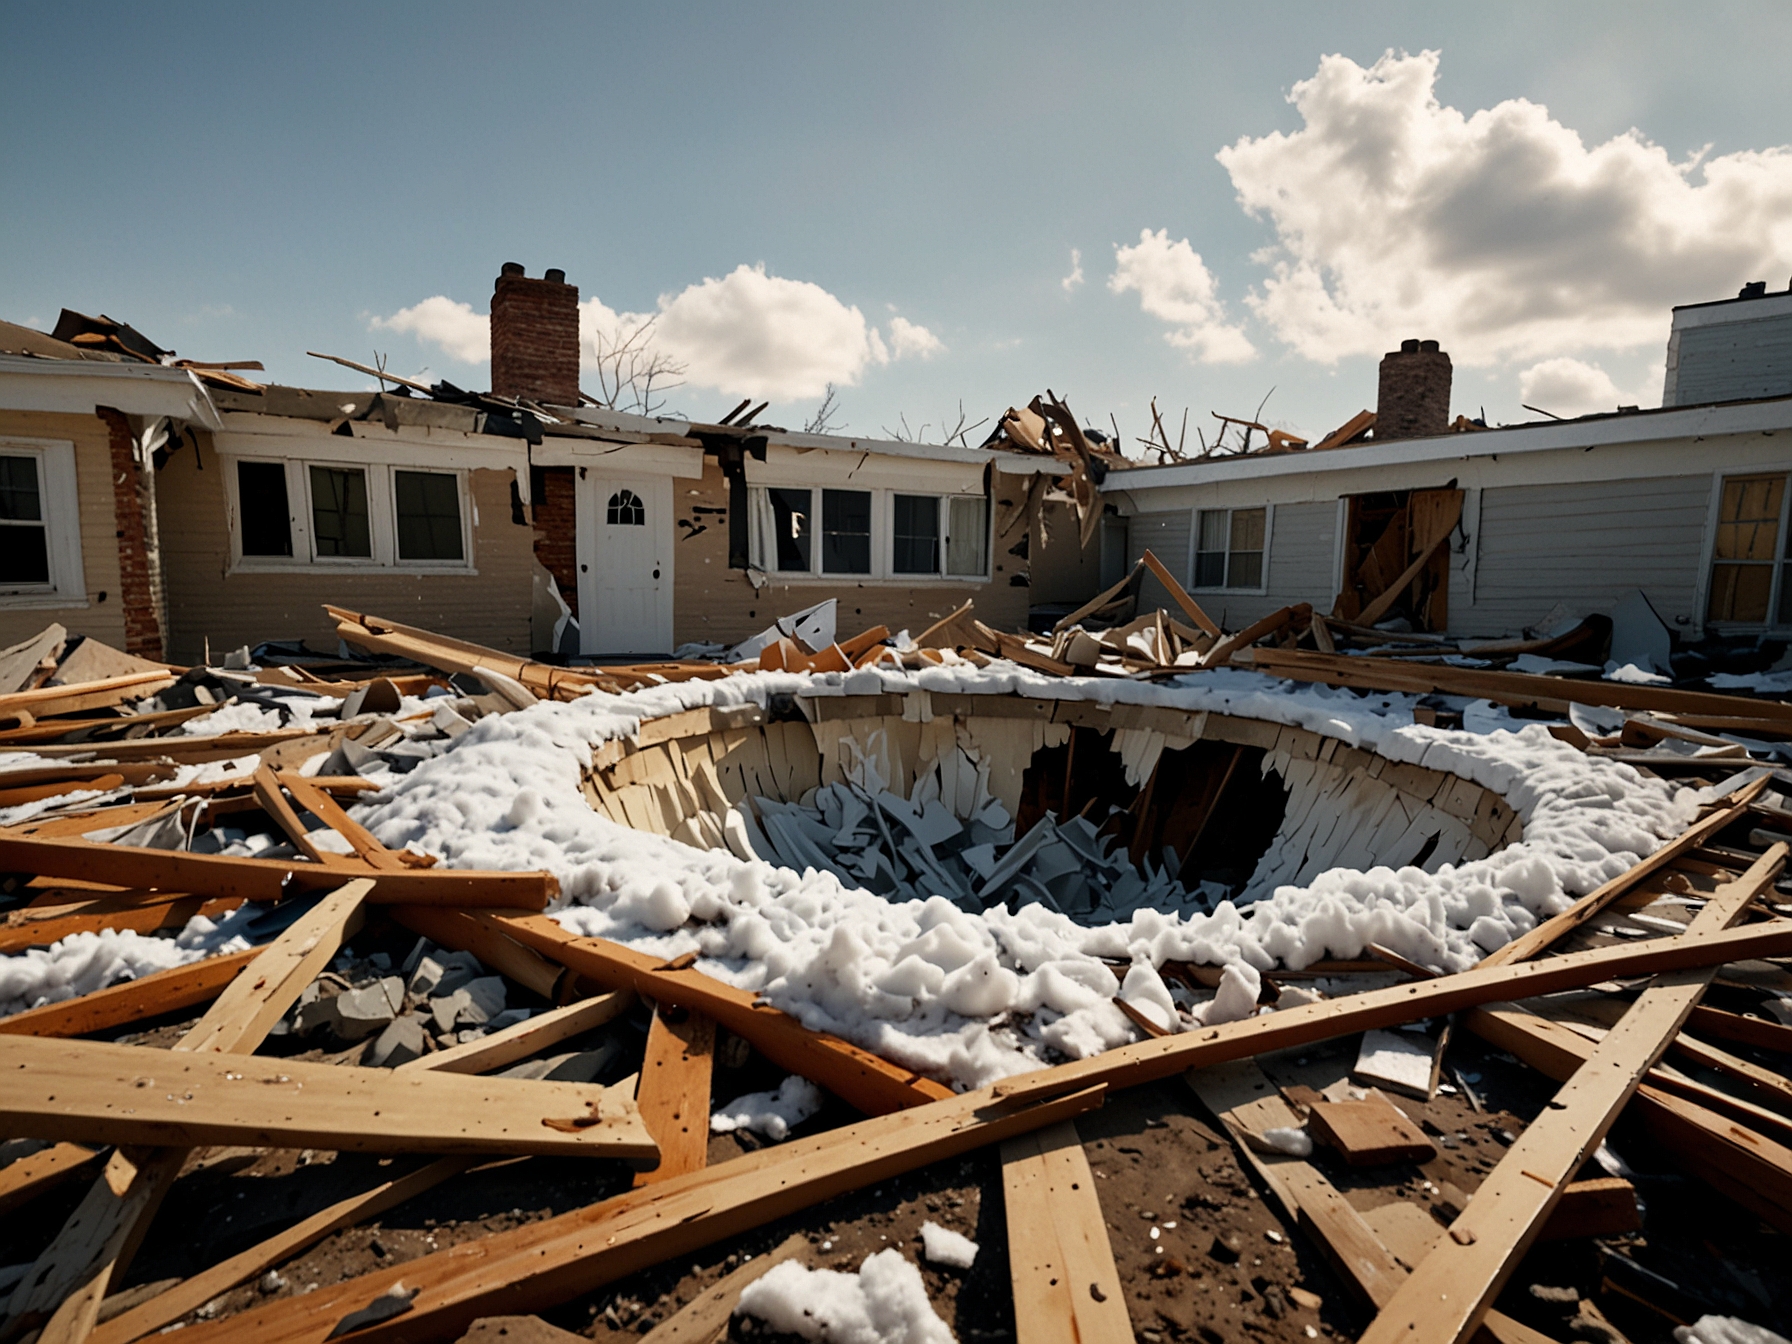 A gaping hole in a New Jersey home's roof surrounded by debris, with a large chunk of ice lying amidst the wreckage, illustrating the extent of the damage.